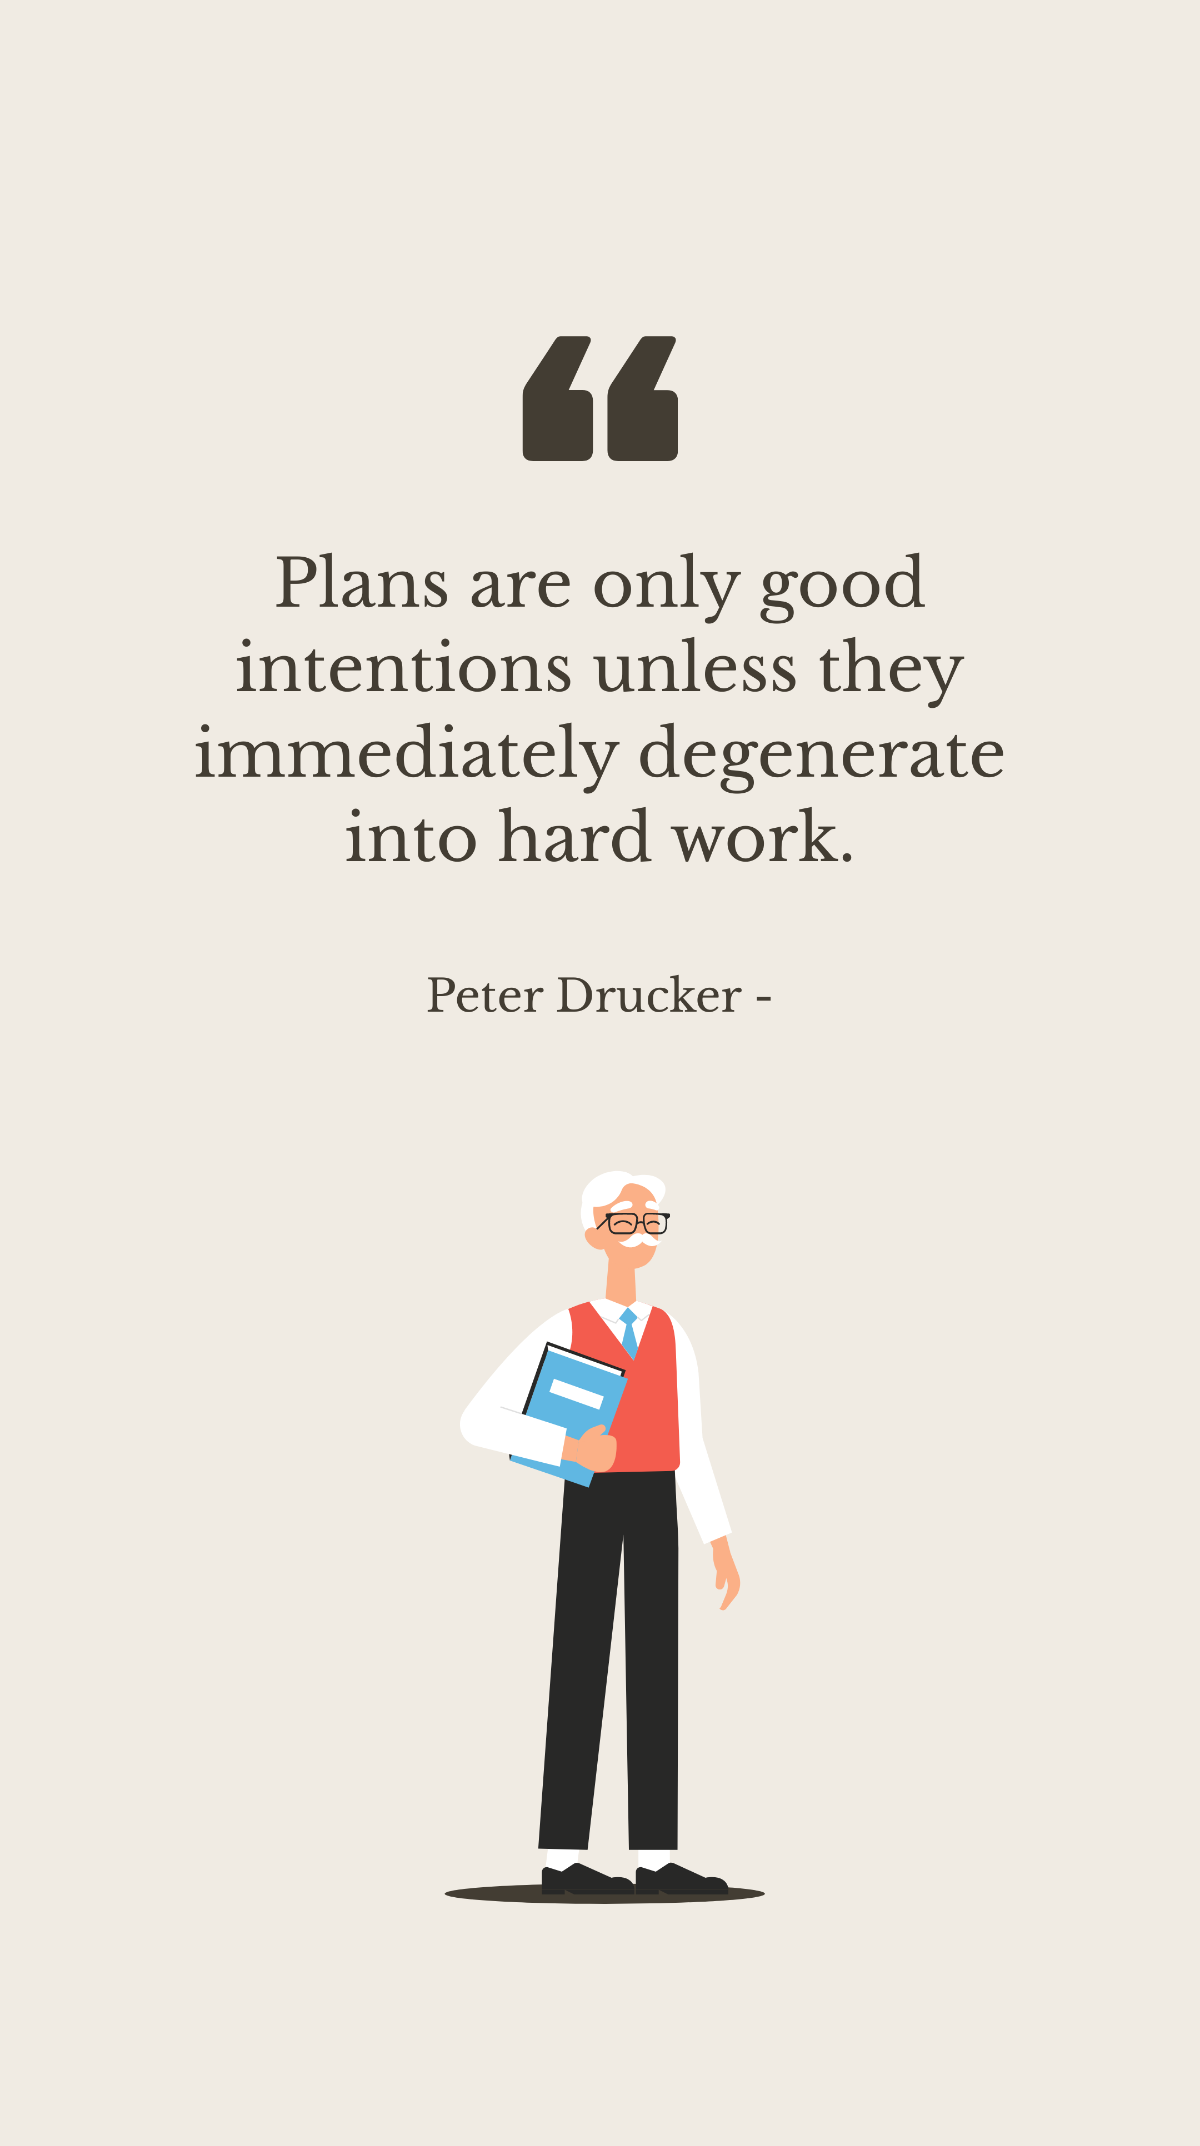 Peter Drucker - Plans are only good intentions unless they immediately degenerate into hard work. Template